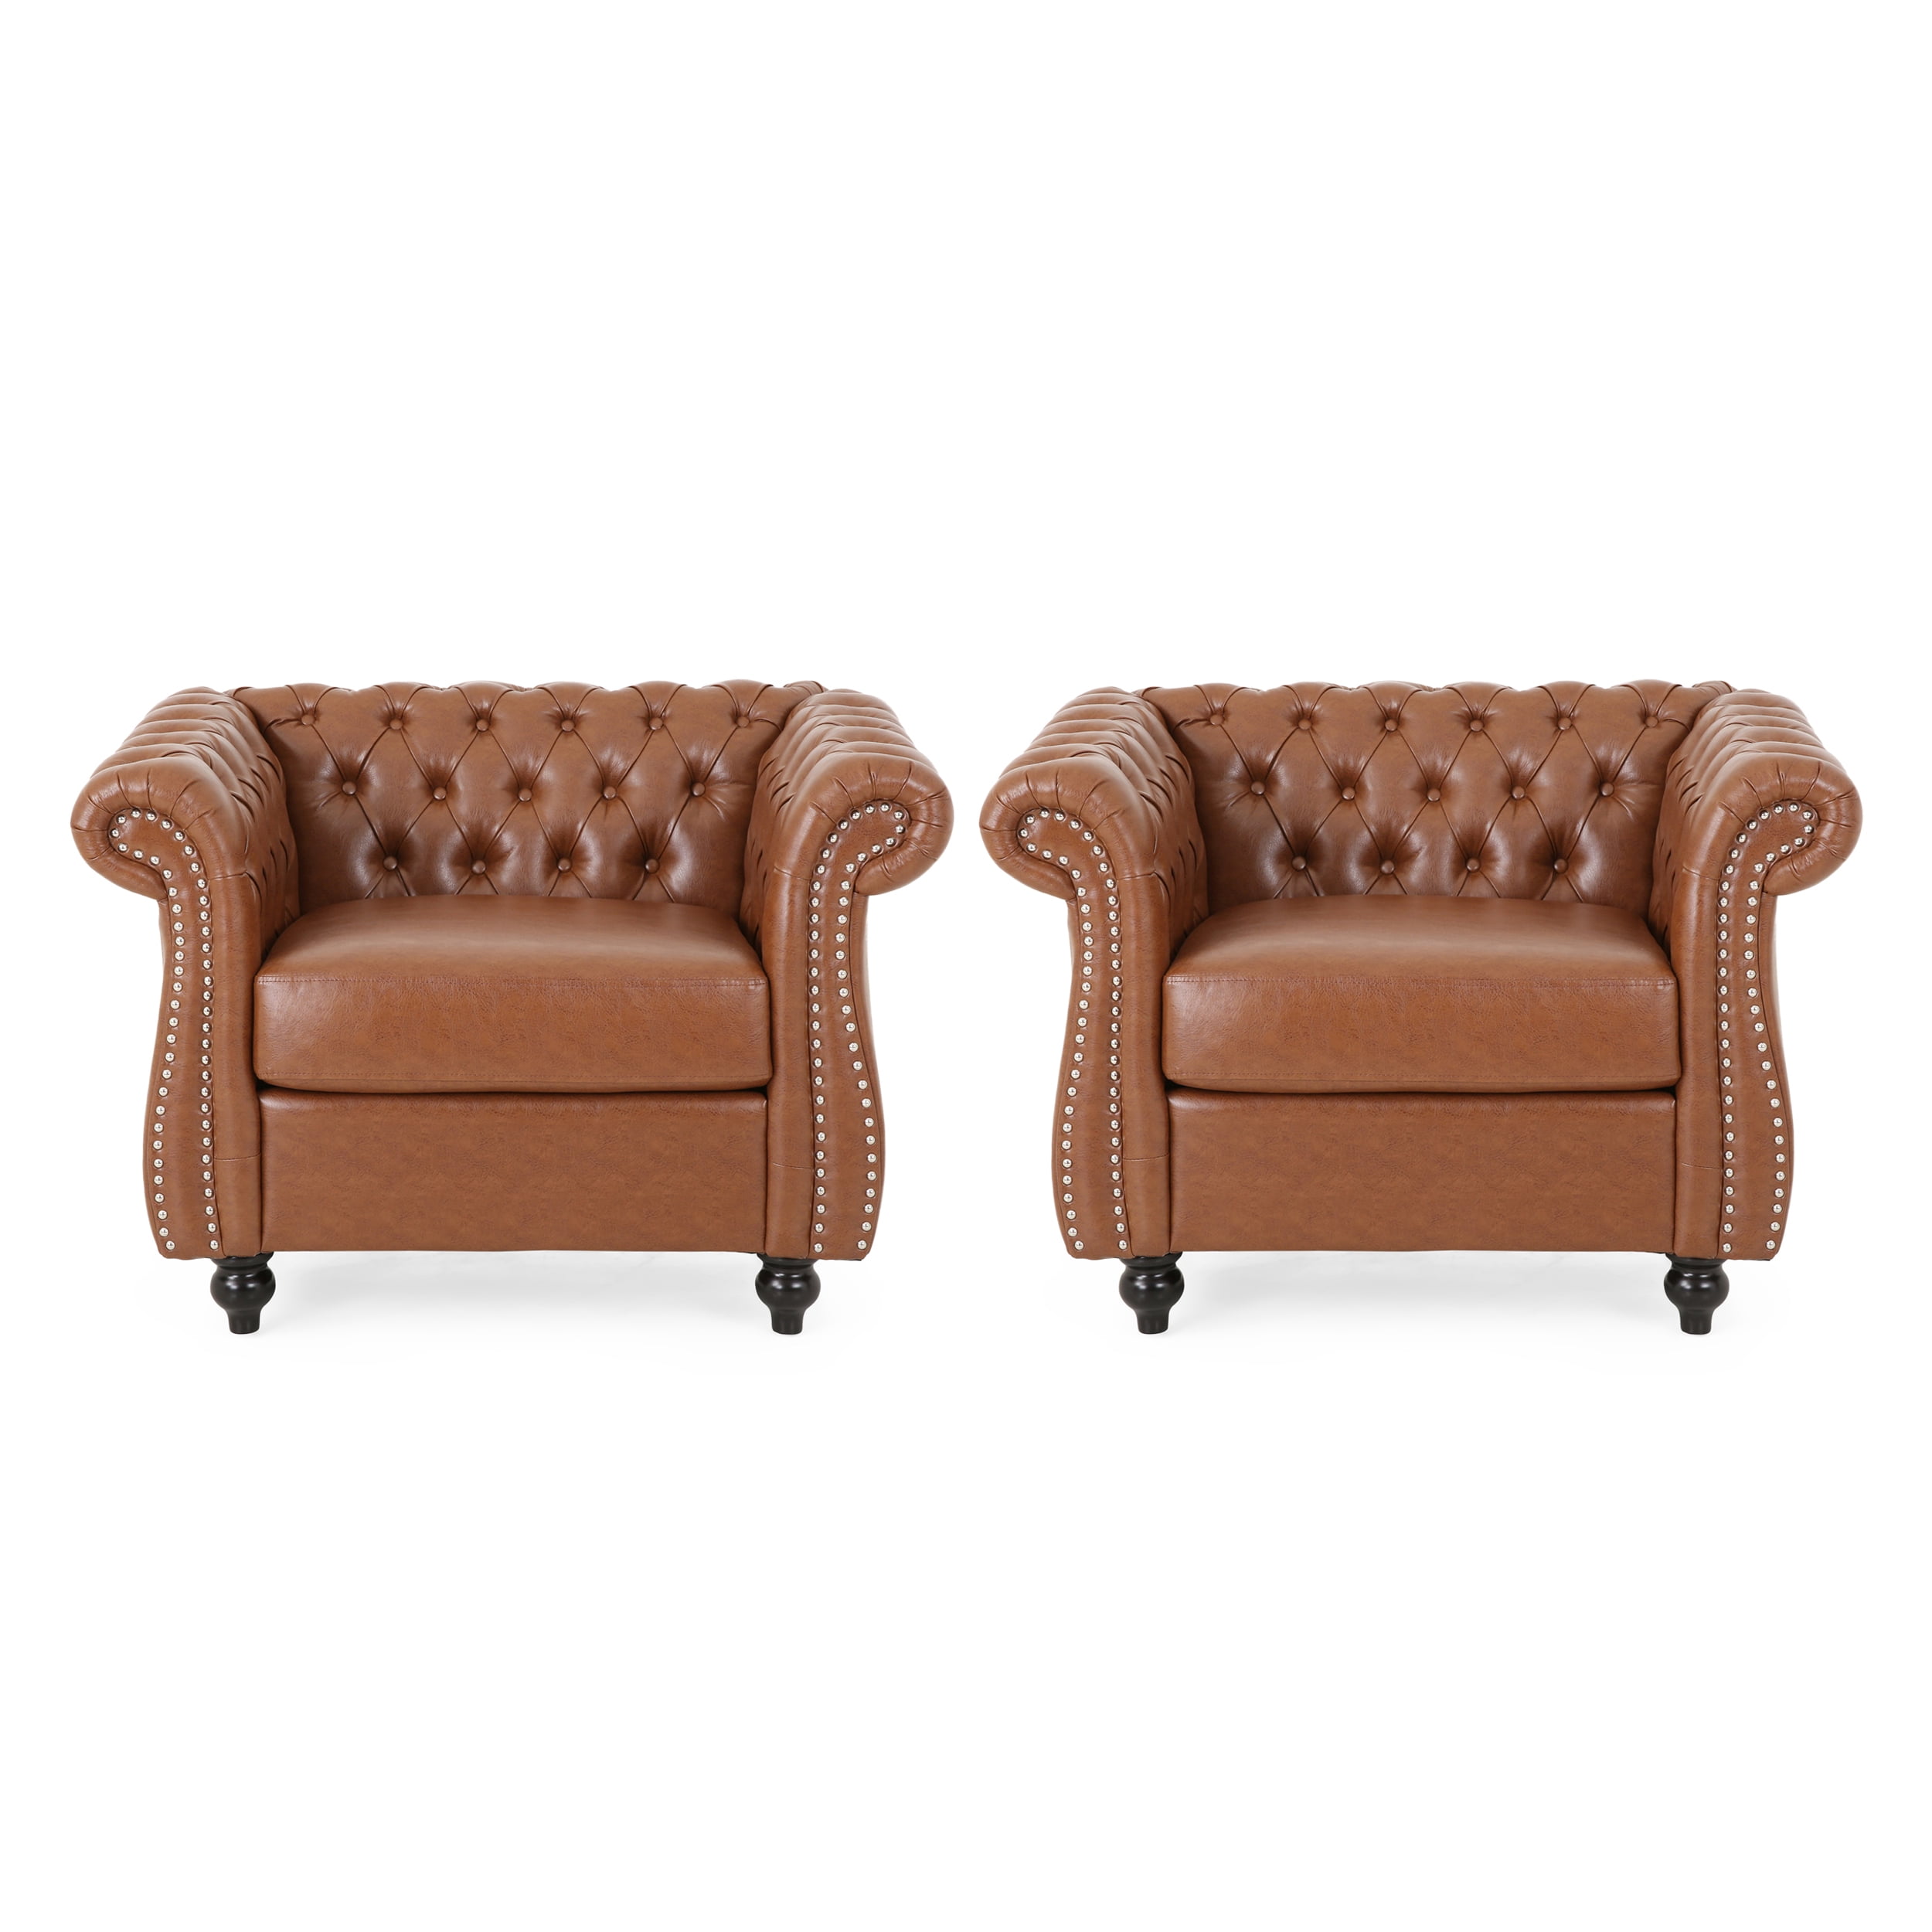 Noble House Phinneas Faux Leather Club, Tan Leather Club Chair